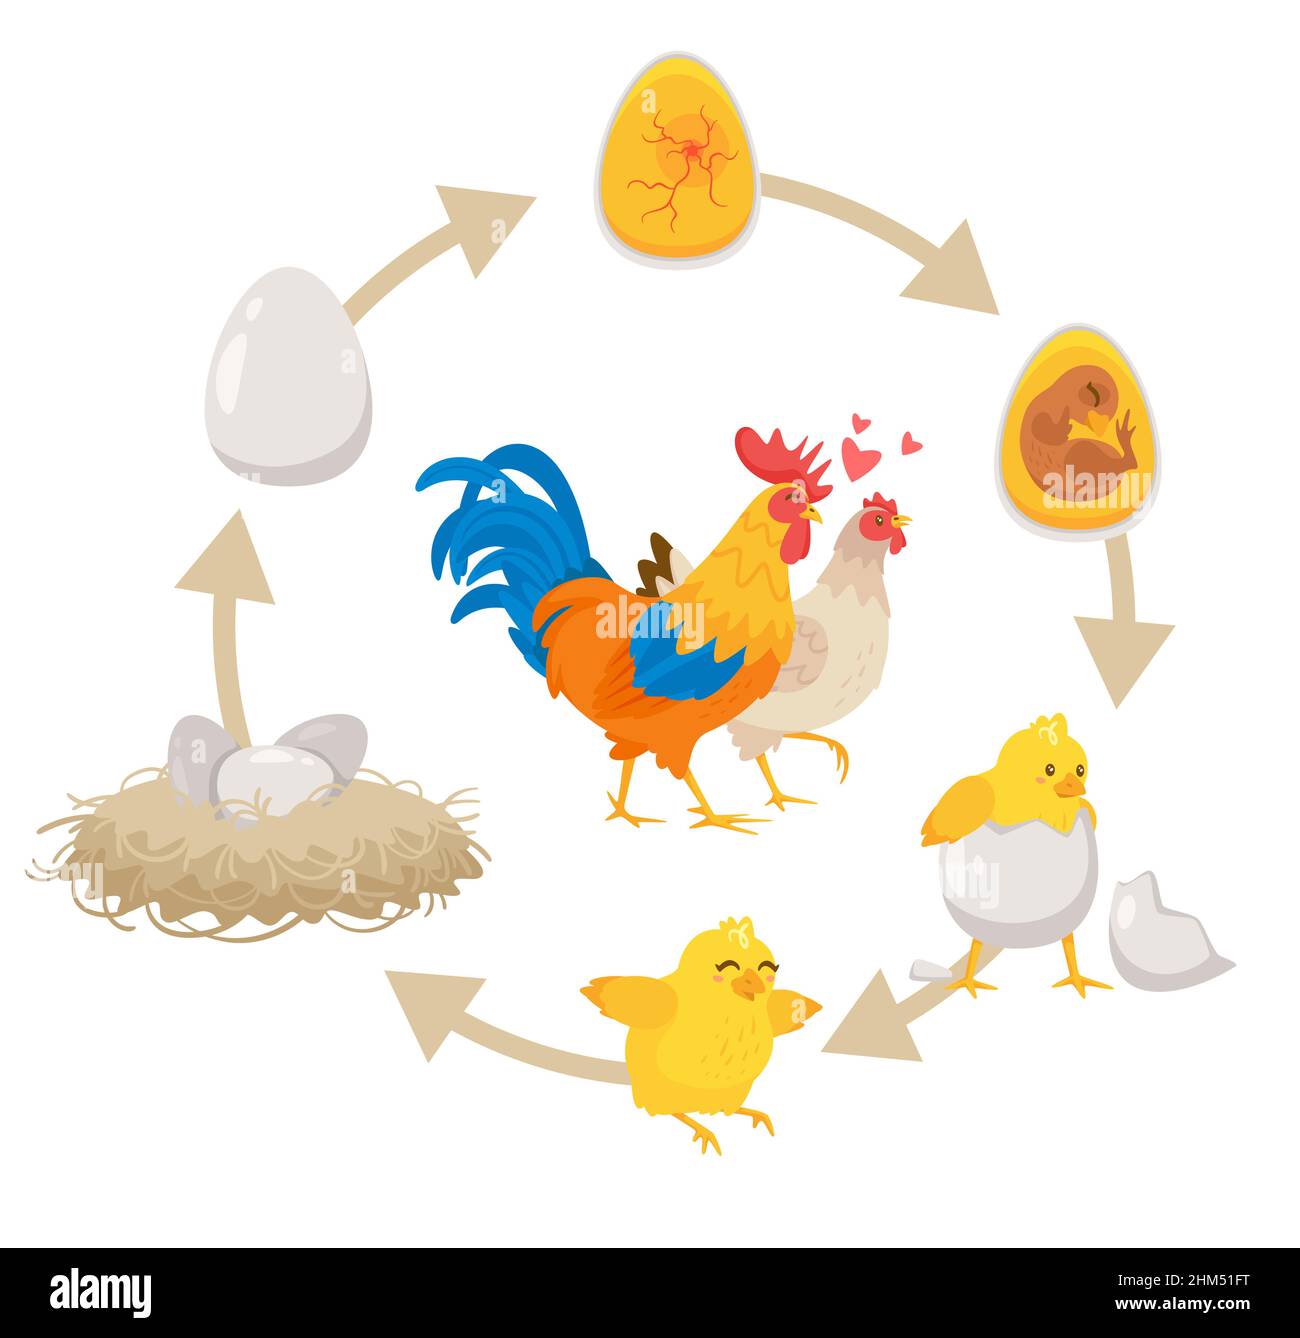 Kids educational scheme of the hatching process. Stock Vector